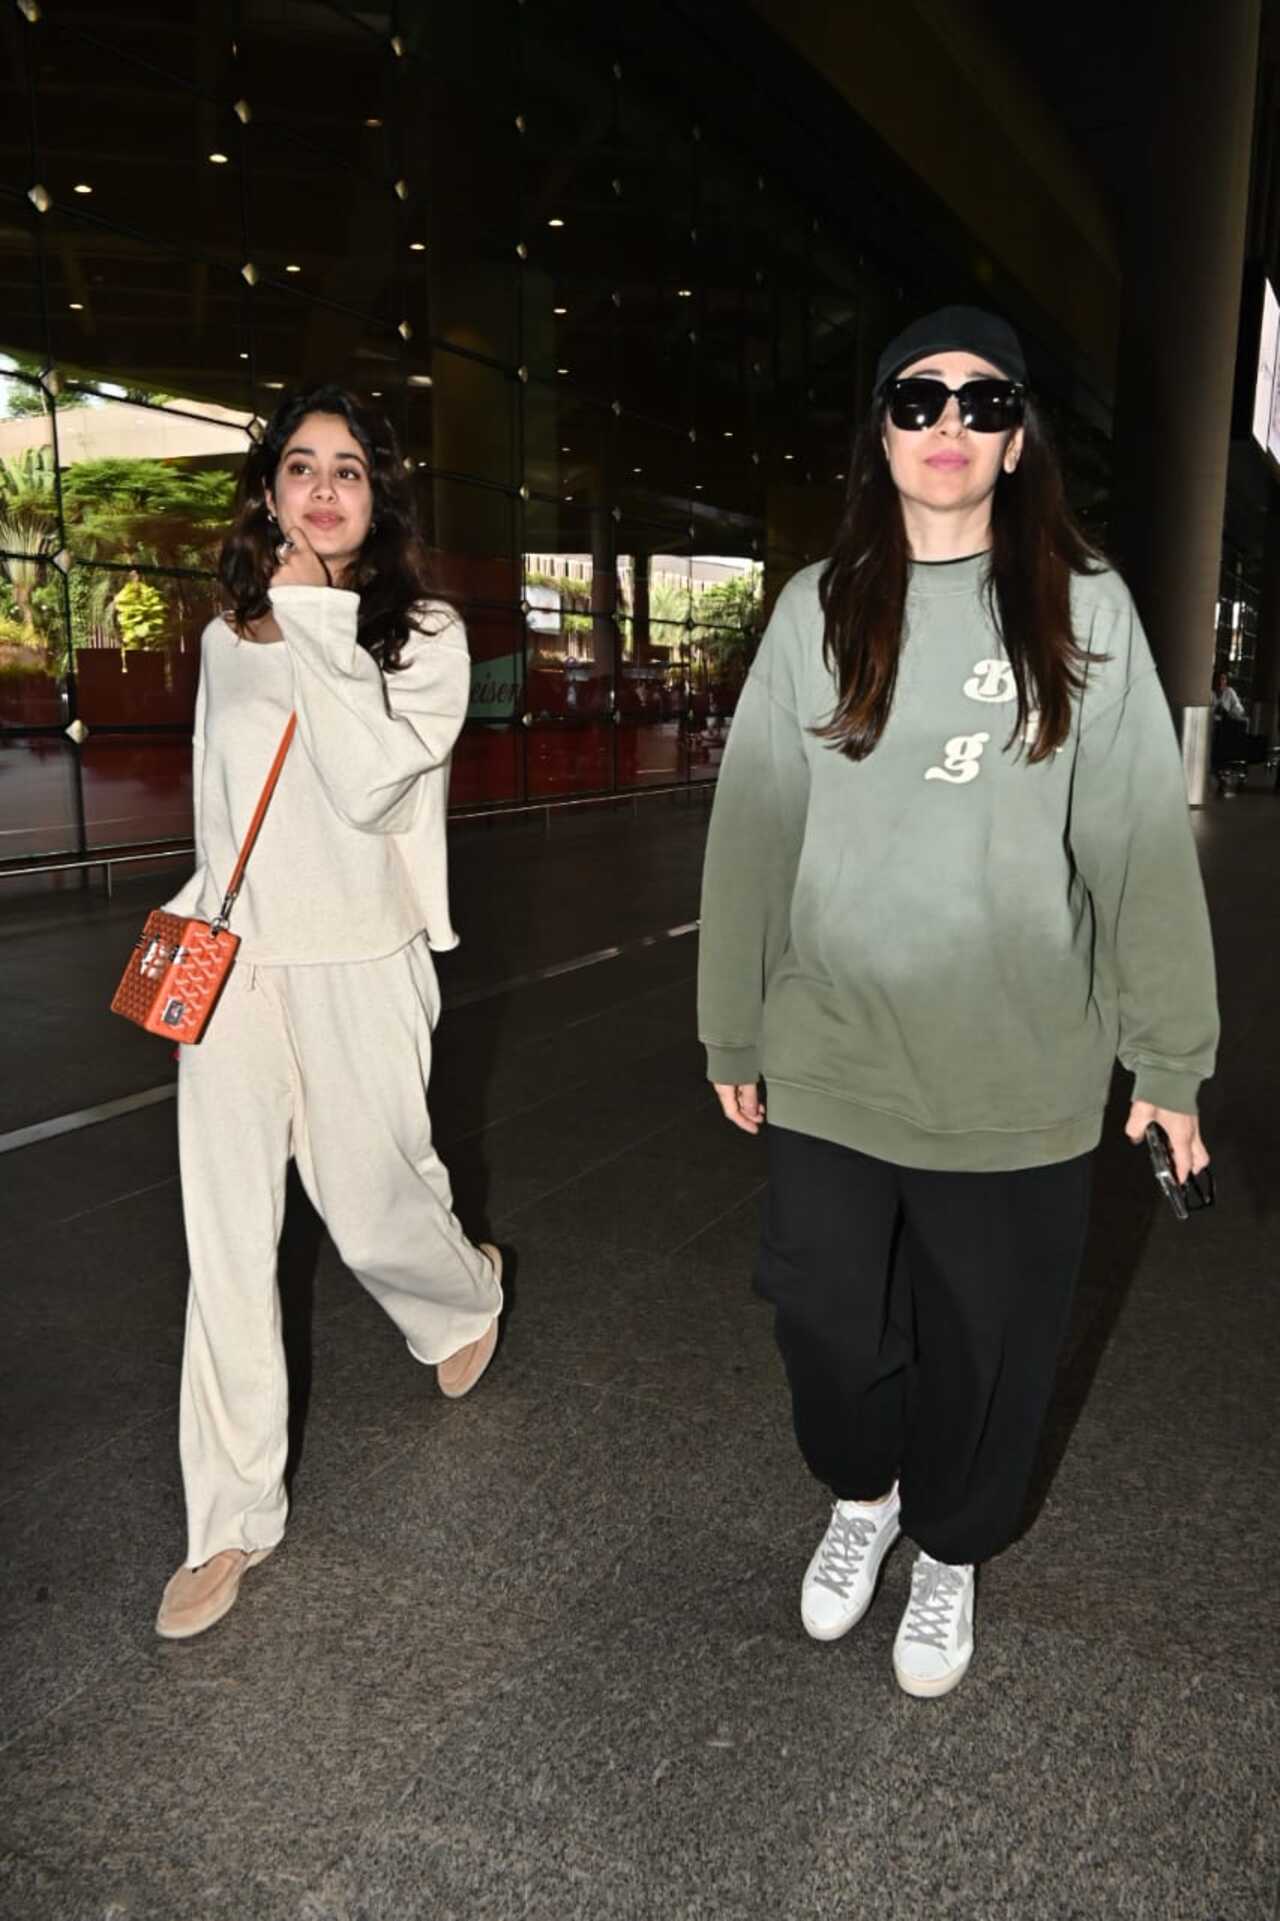 Karisma Kapoor and Janhvi Kapoor were photographed as they walked out of the airport together